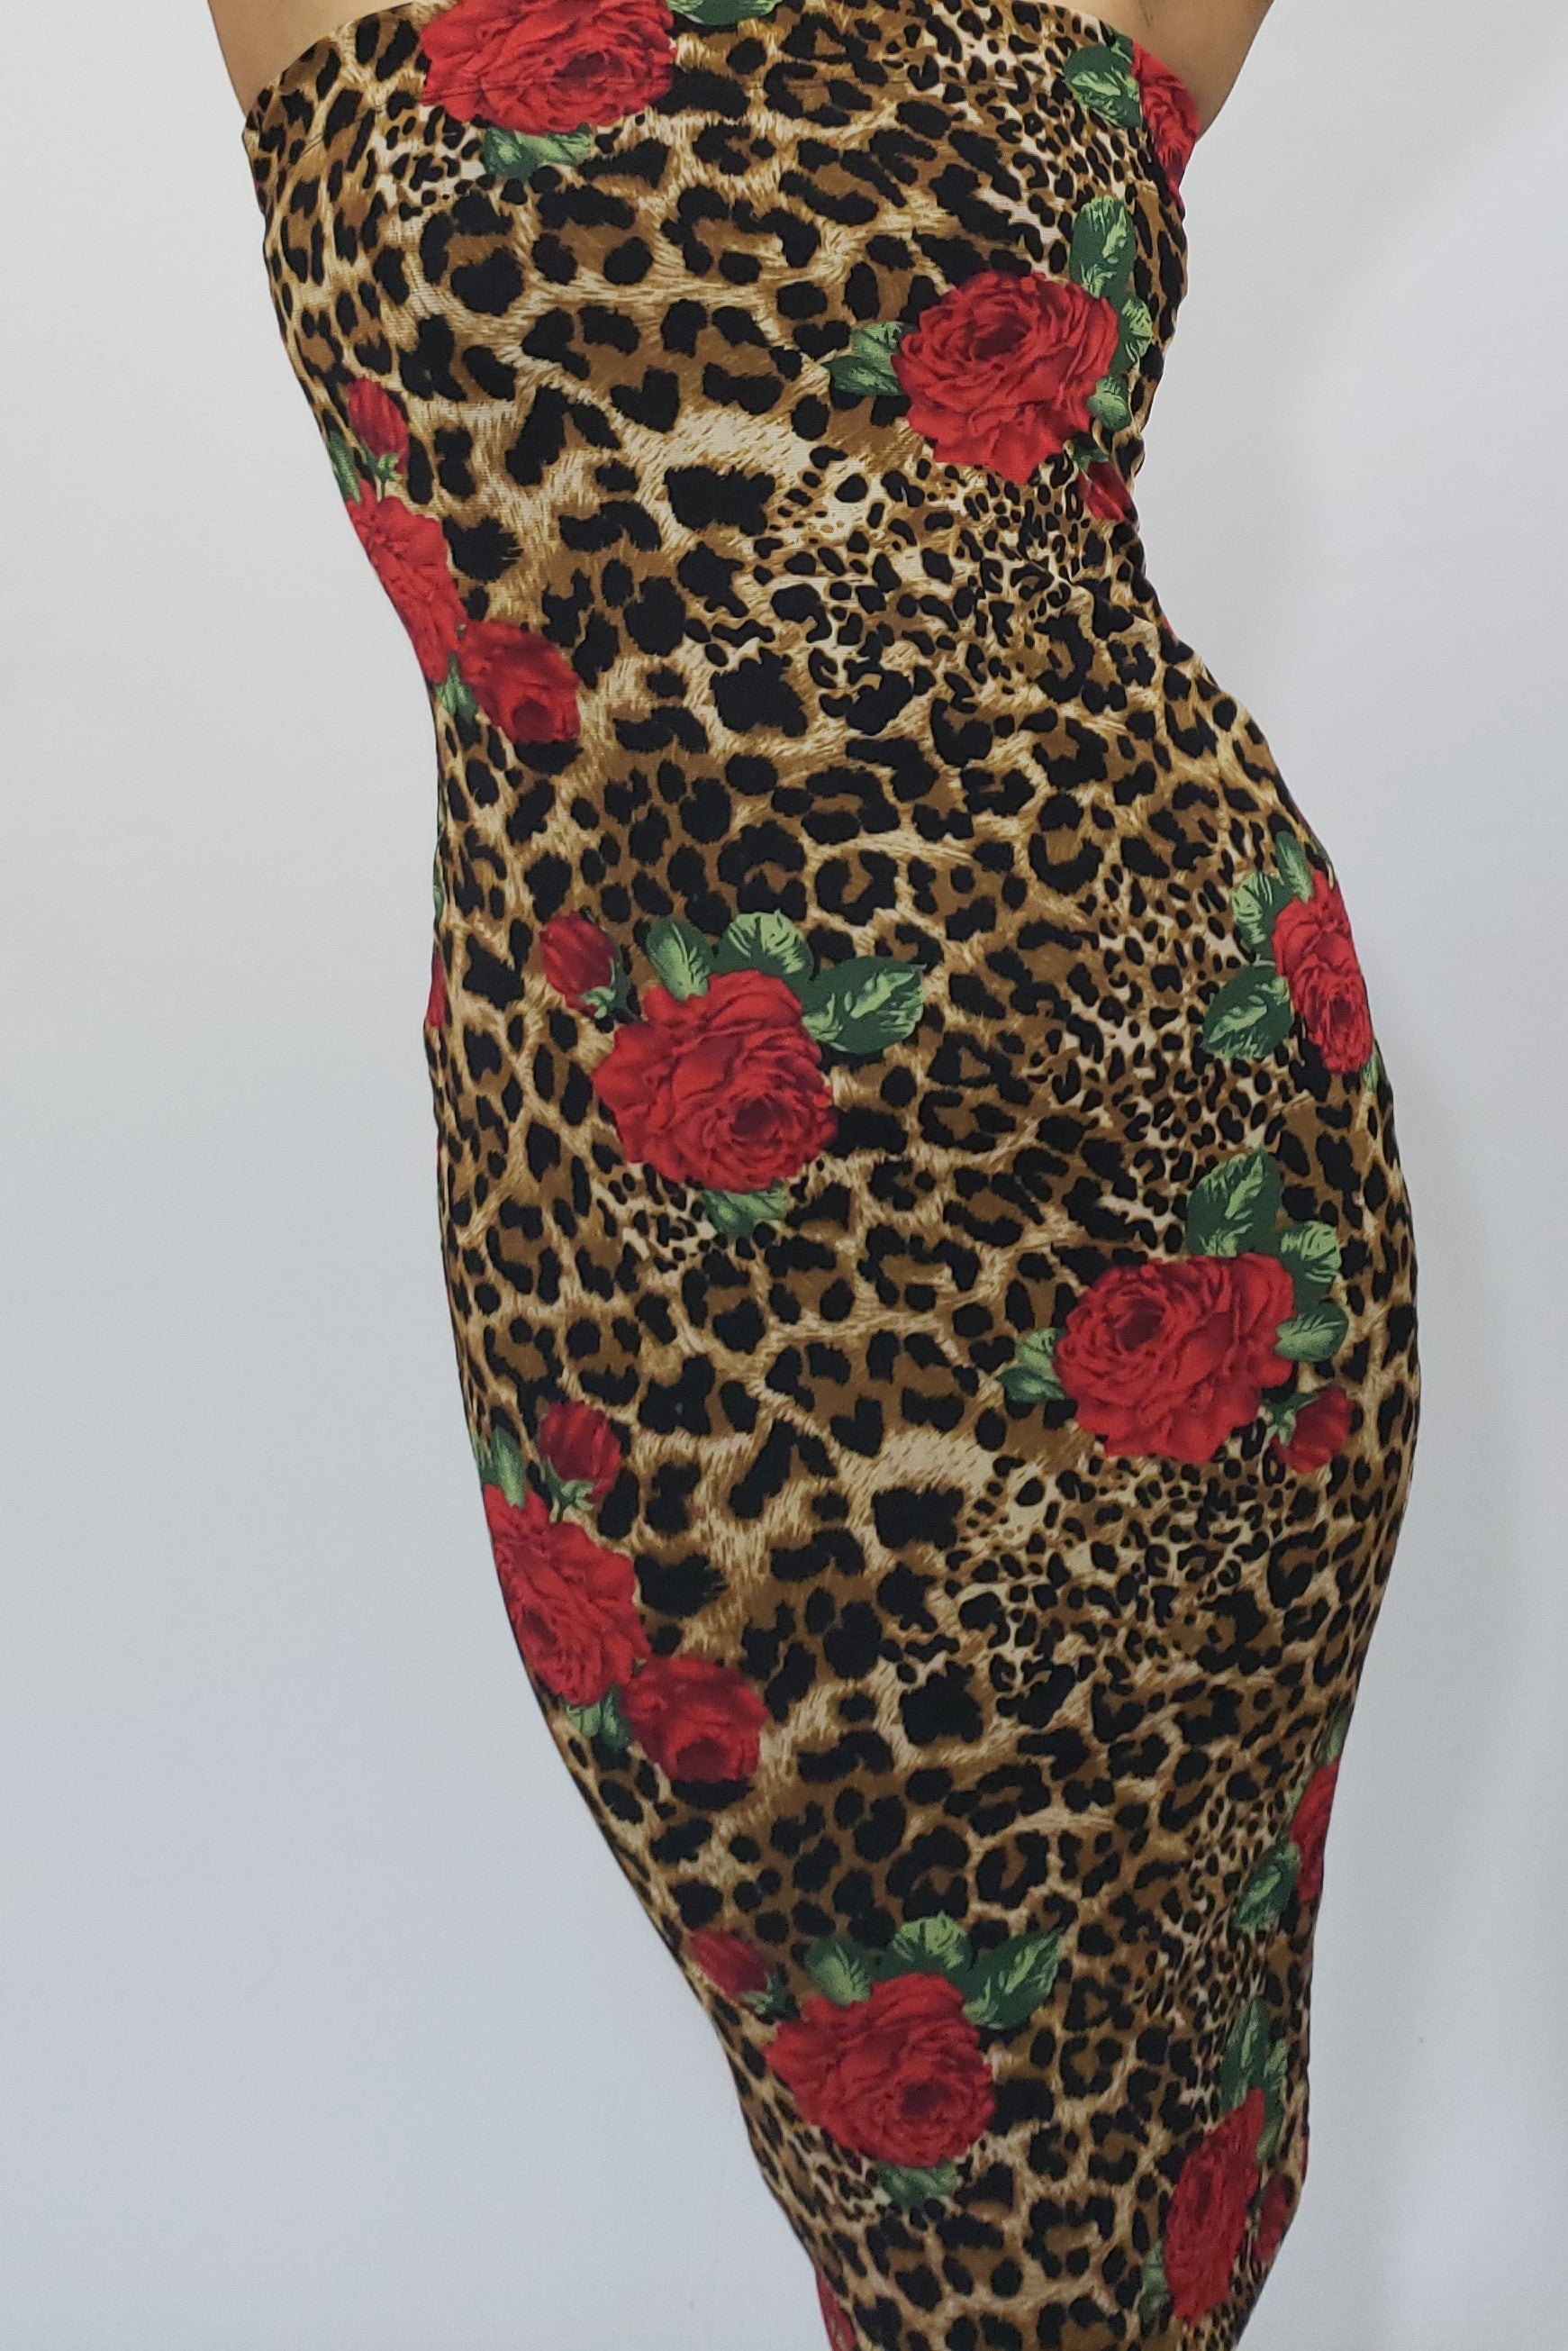 A Walk on "D" Wild Side Animal and Red Roses Midi Tube Dress - Houzz of DVA Boutique